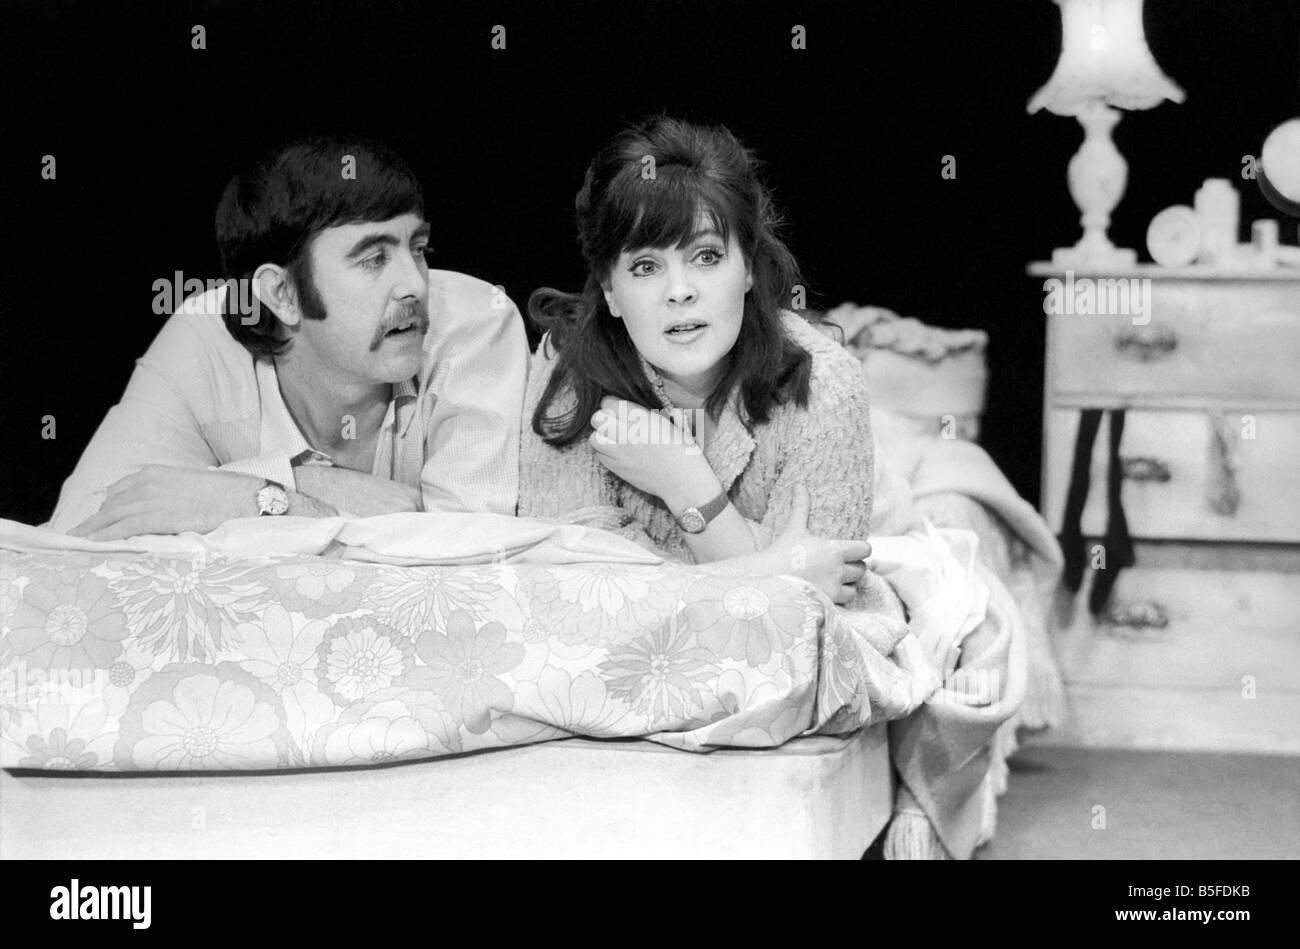 Actor John Alderton and actress wife Pauline Collins seen here on stage. January 1974 S74-0024-001 Stock Photo